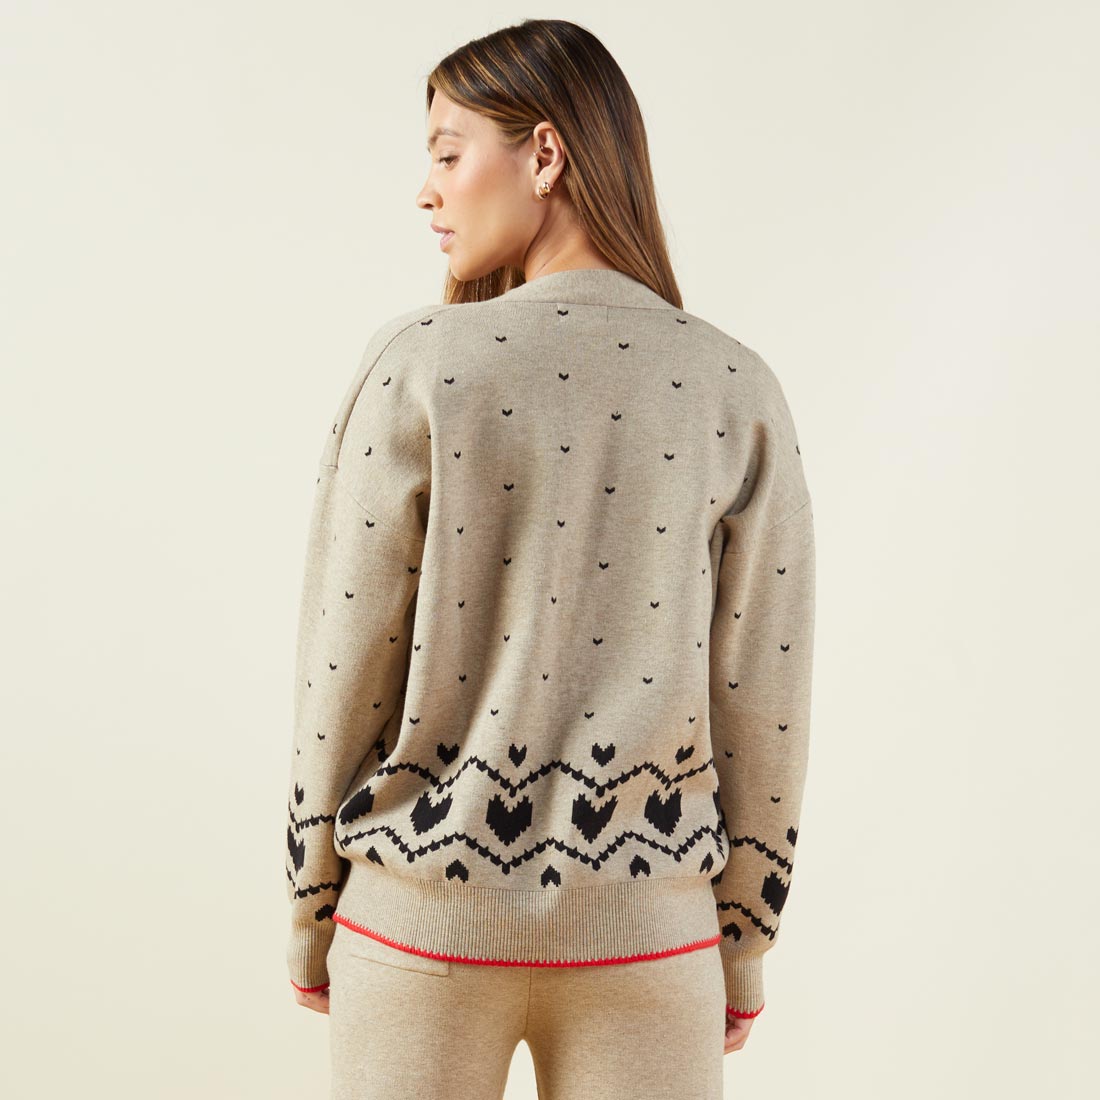 Back view of model wearing the supersoft sweater knit heart fair isle cardigan in oatmeal.